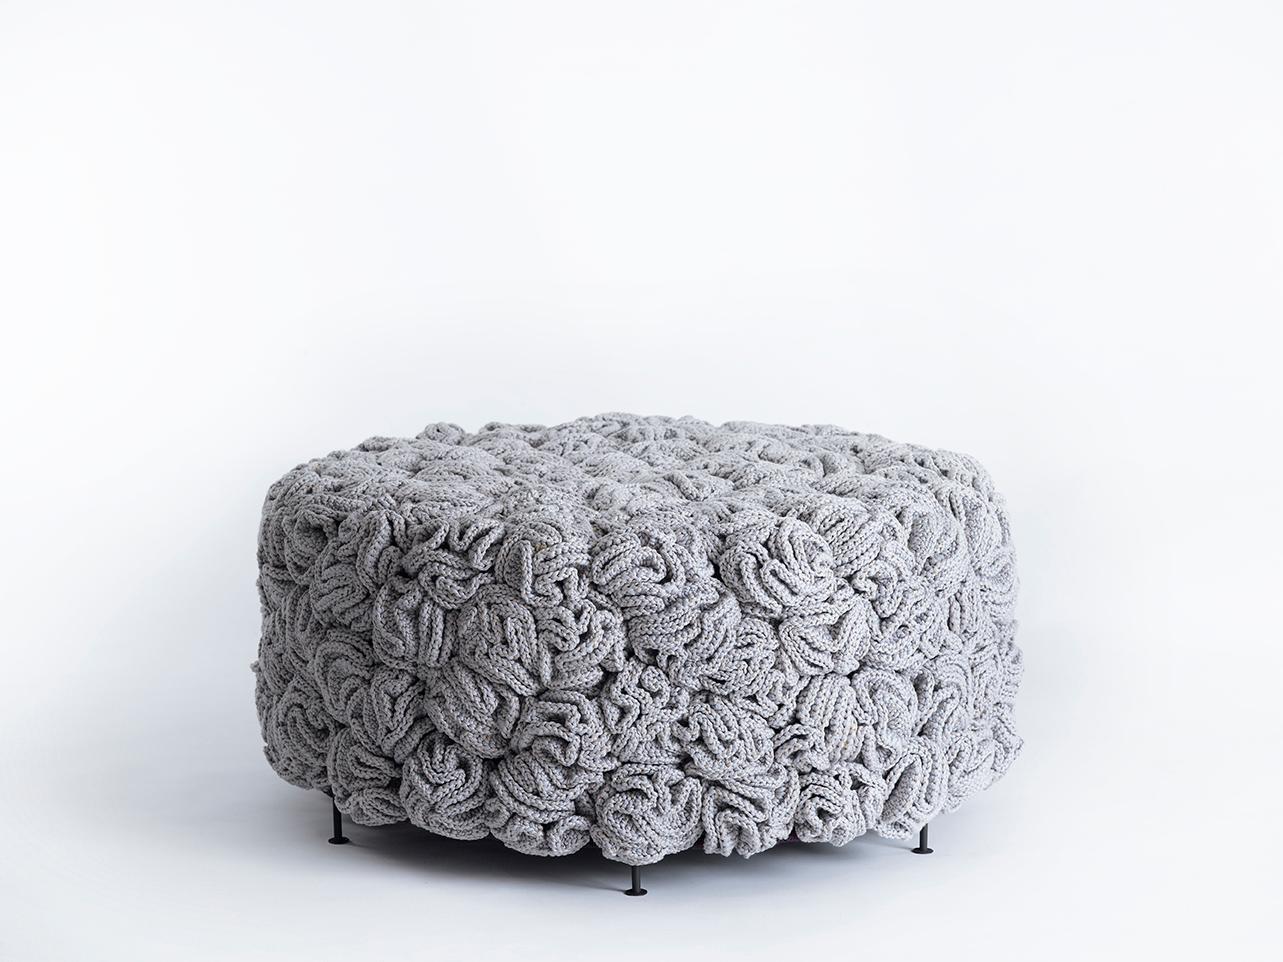 Hand-Knotted Elements Mini Pouf, Iota, Represented by Tuleste Factory For Sale